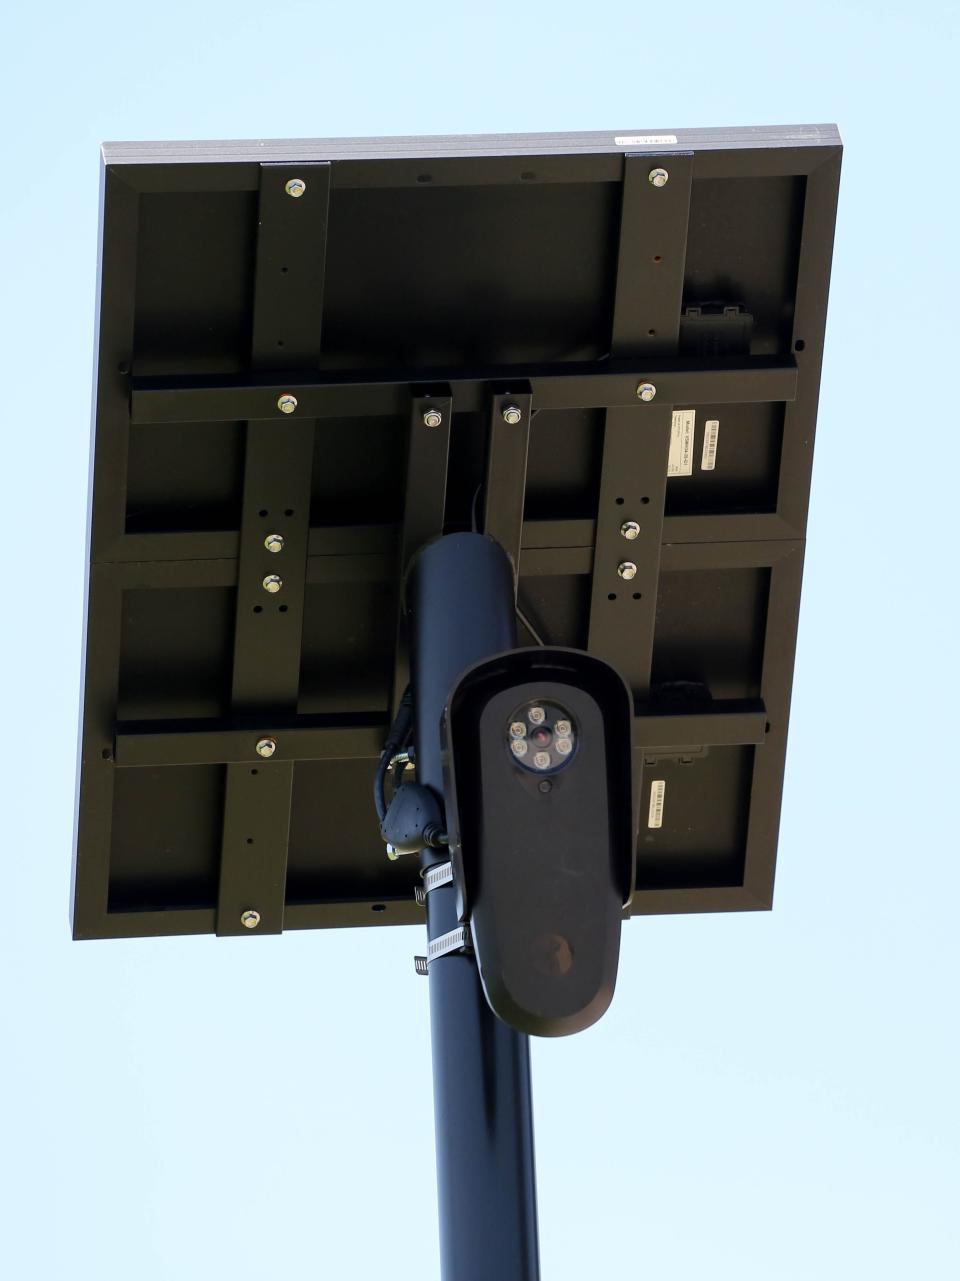 A Flock automatic license plate reader camera, owned by Penn Square Mall, stands near the south mall entrance.